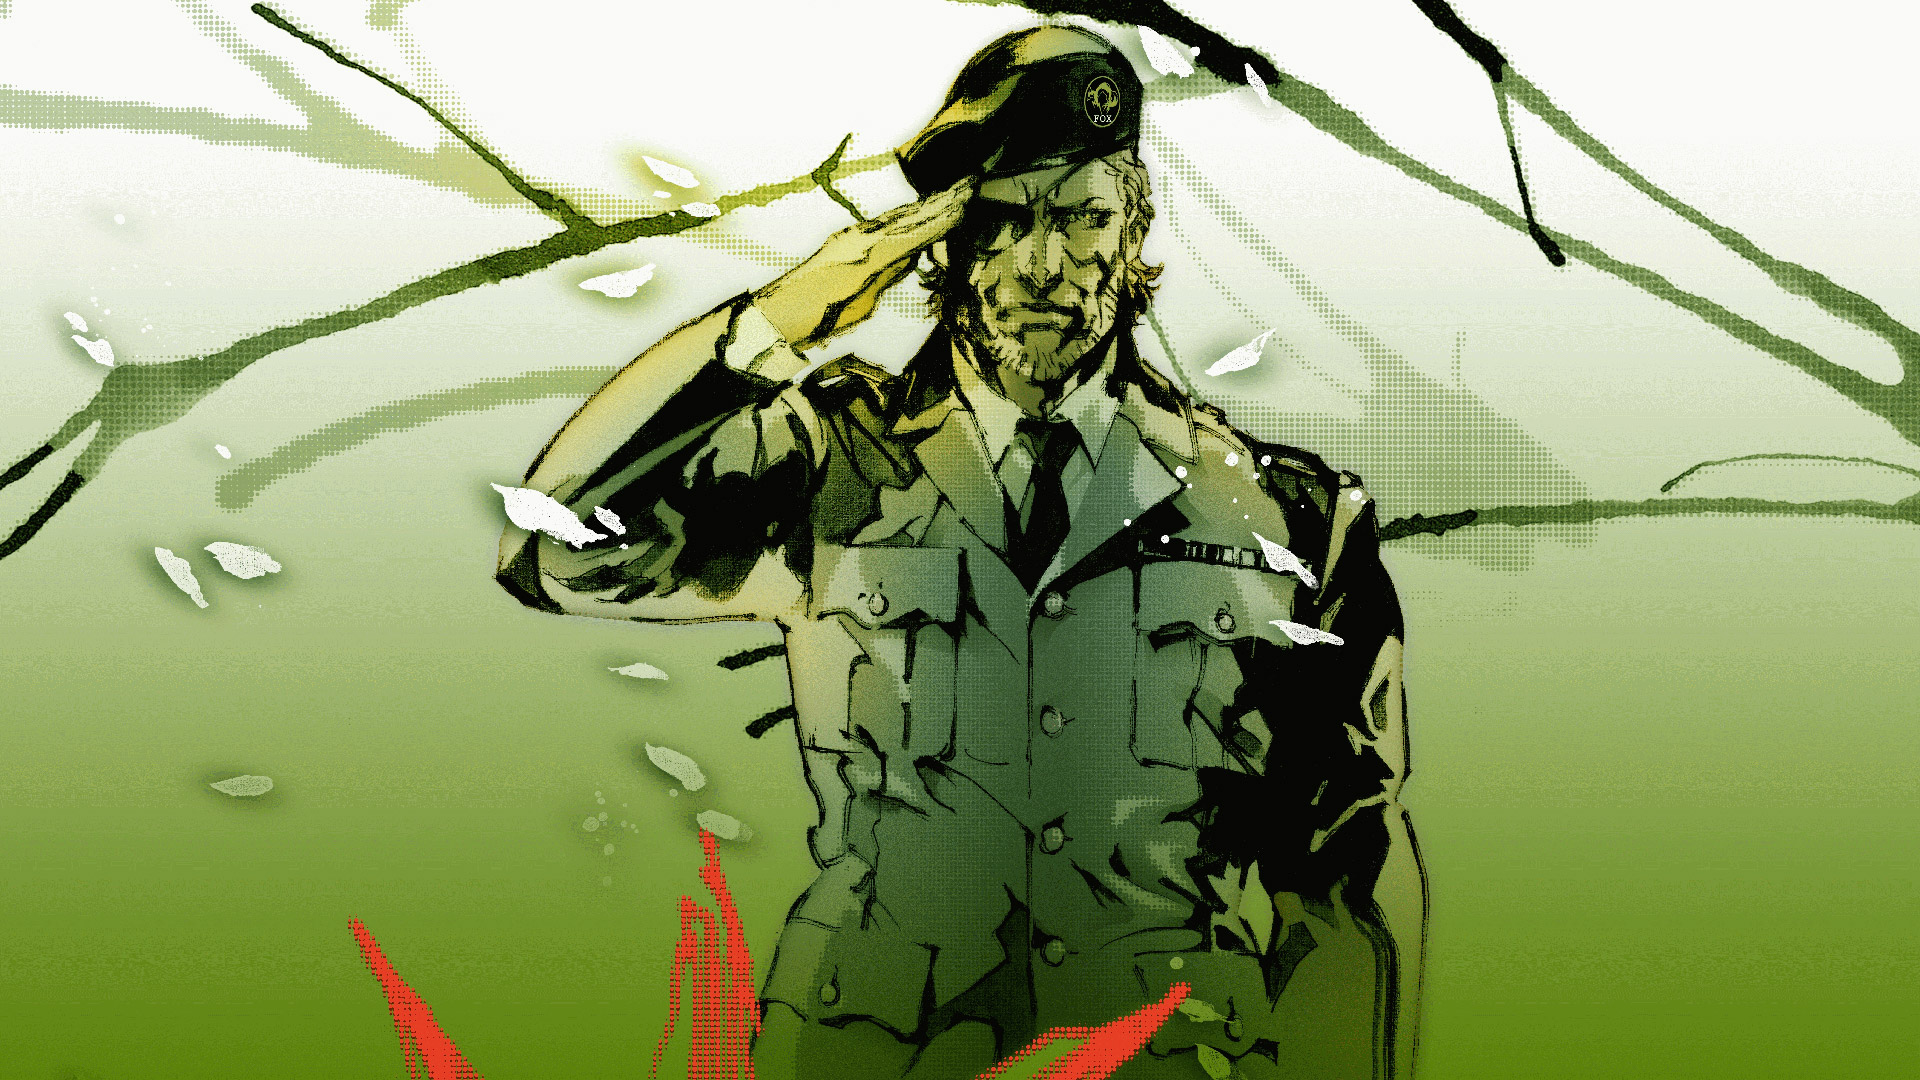 Metal Gear Solid Solid Snake 1920x1080